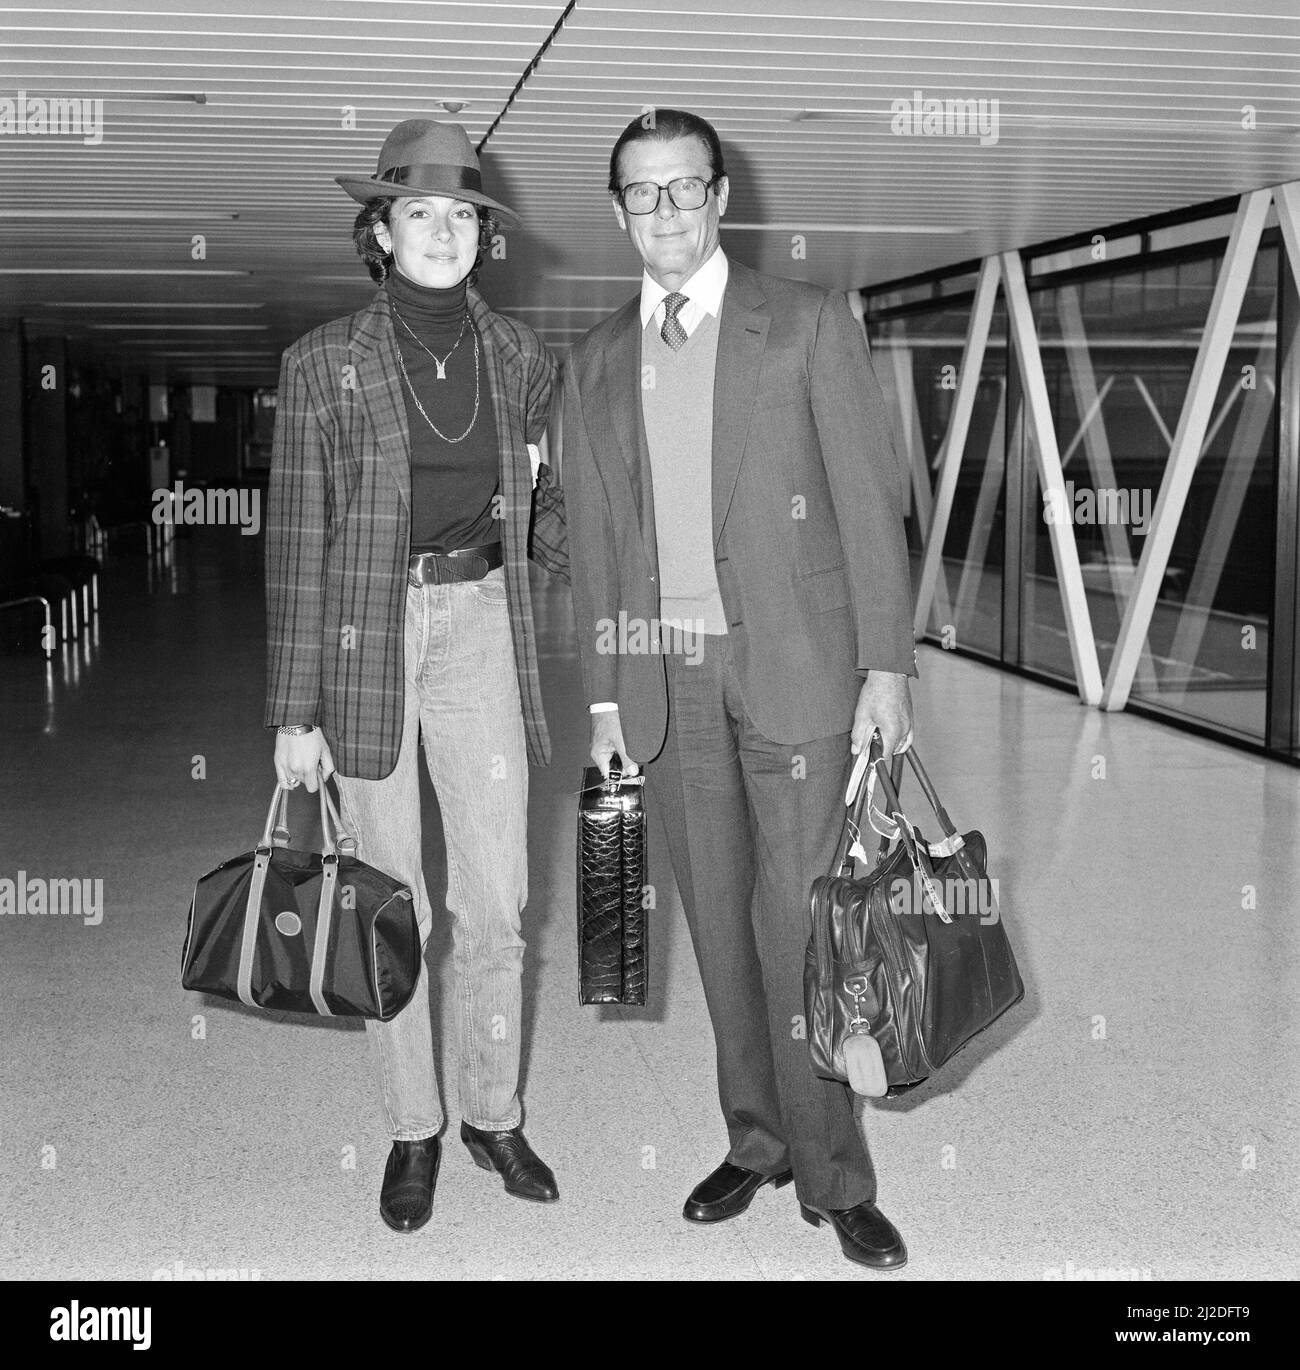 James Bond star Roger Moore turned up in another role today - as a devoted father. He flew from London to Italy with his 21-year-old daughter Deborah - she'll be appearing at a fashion show in Pisa. 18th April 1986. Stock Photo